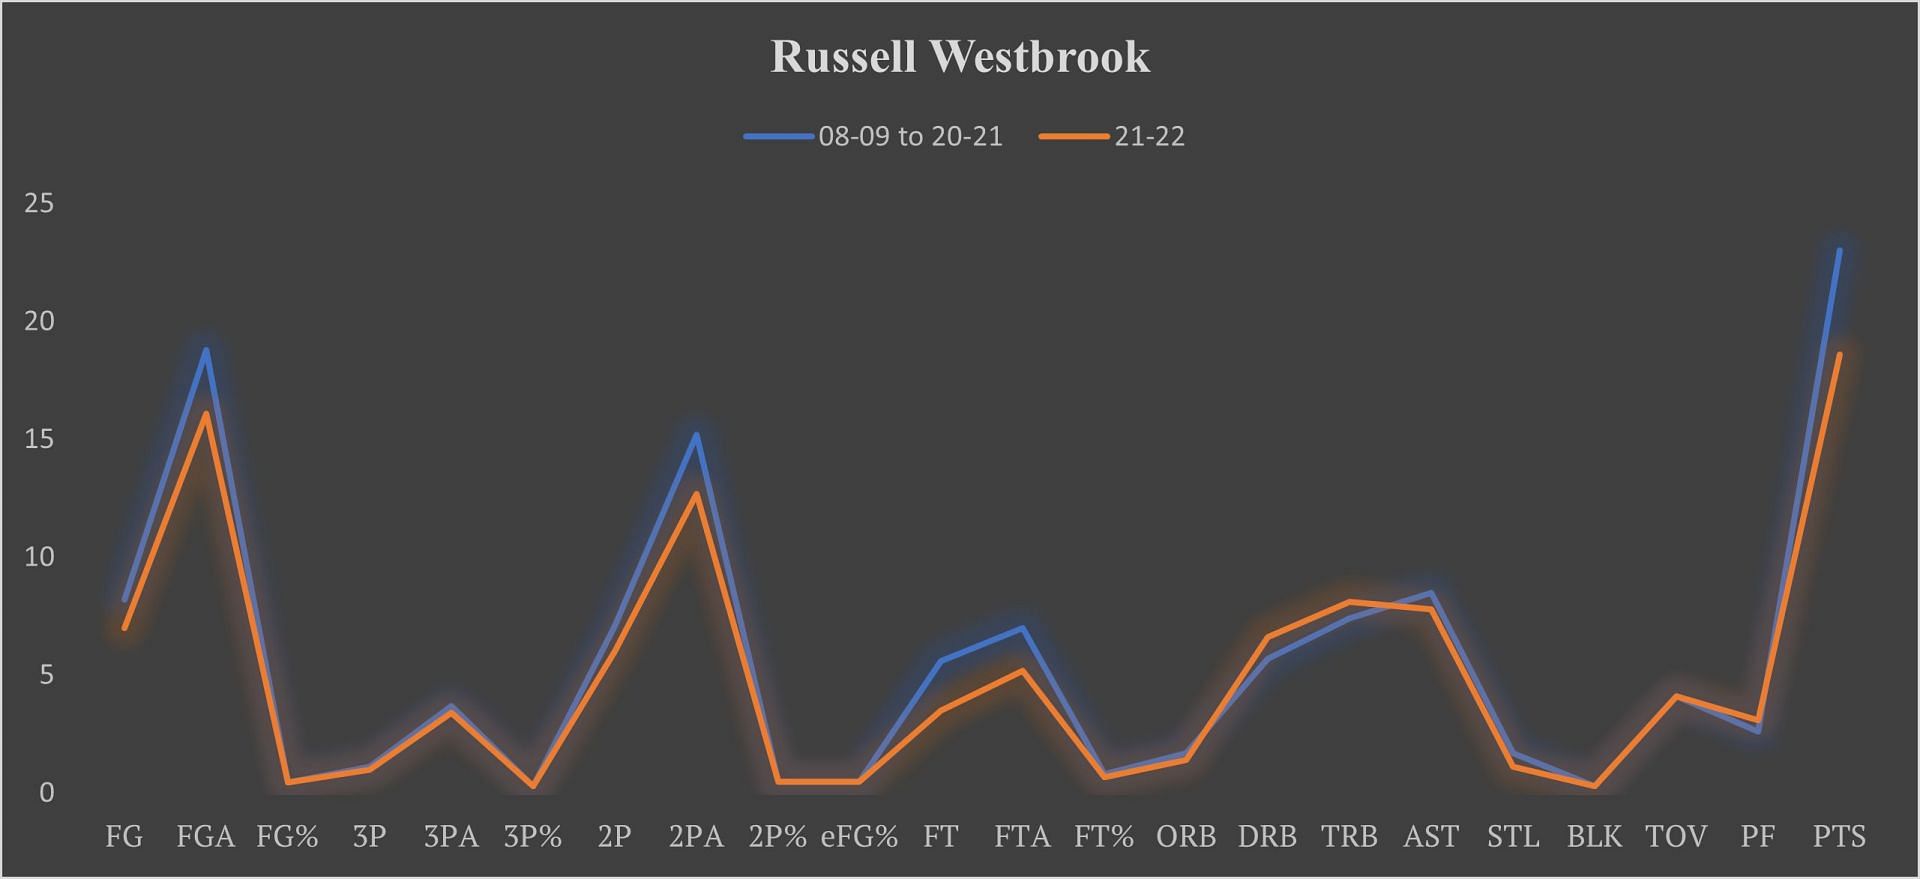 Russell Westbrook is not doing anything he hasn't done before, and the guy has a regular season MVP.